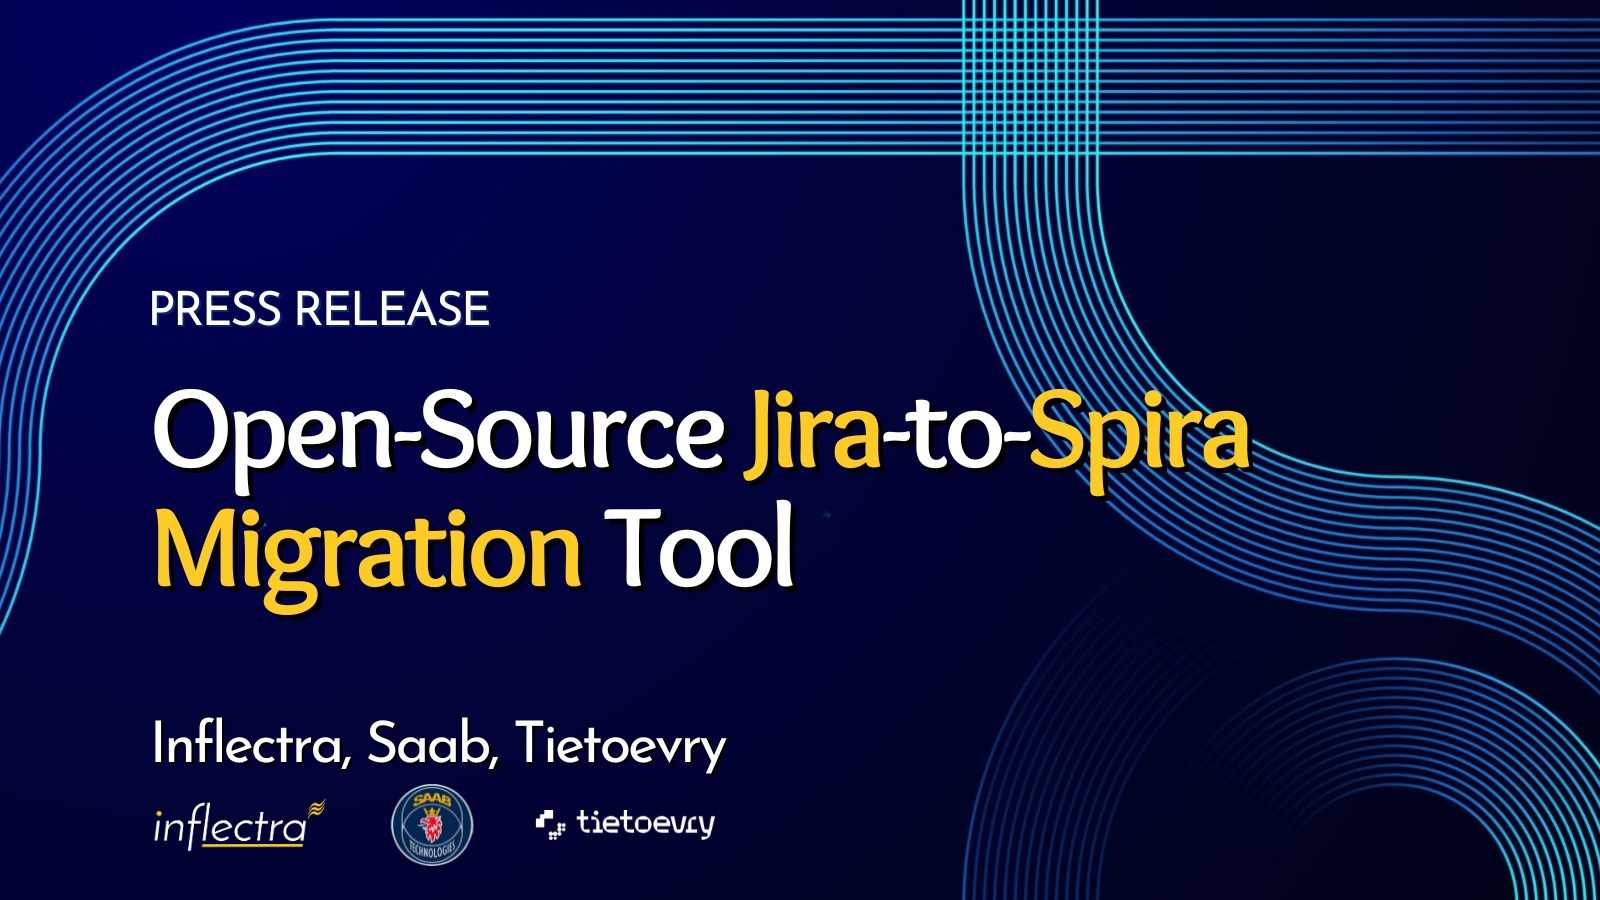 inflectra-saab-ab-and-tietoevry-ab-launch-an-open-source-jira-to-spiraplan-migration-tool-press-release-image